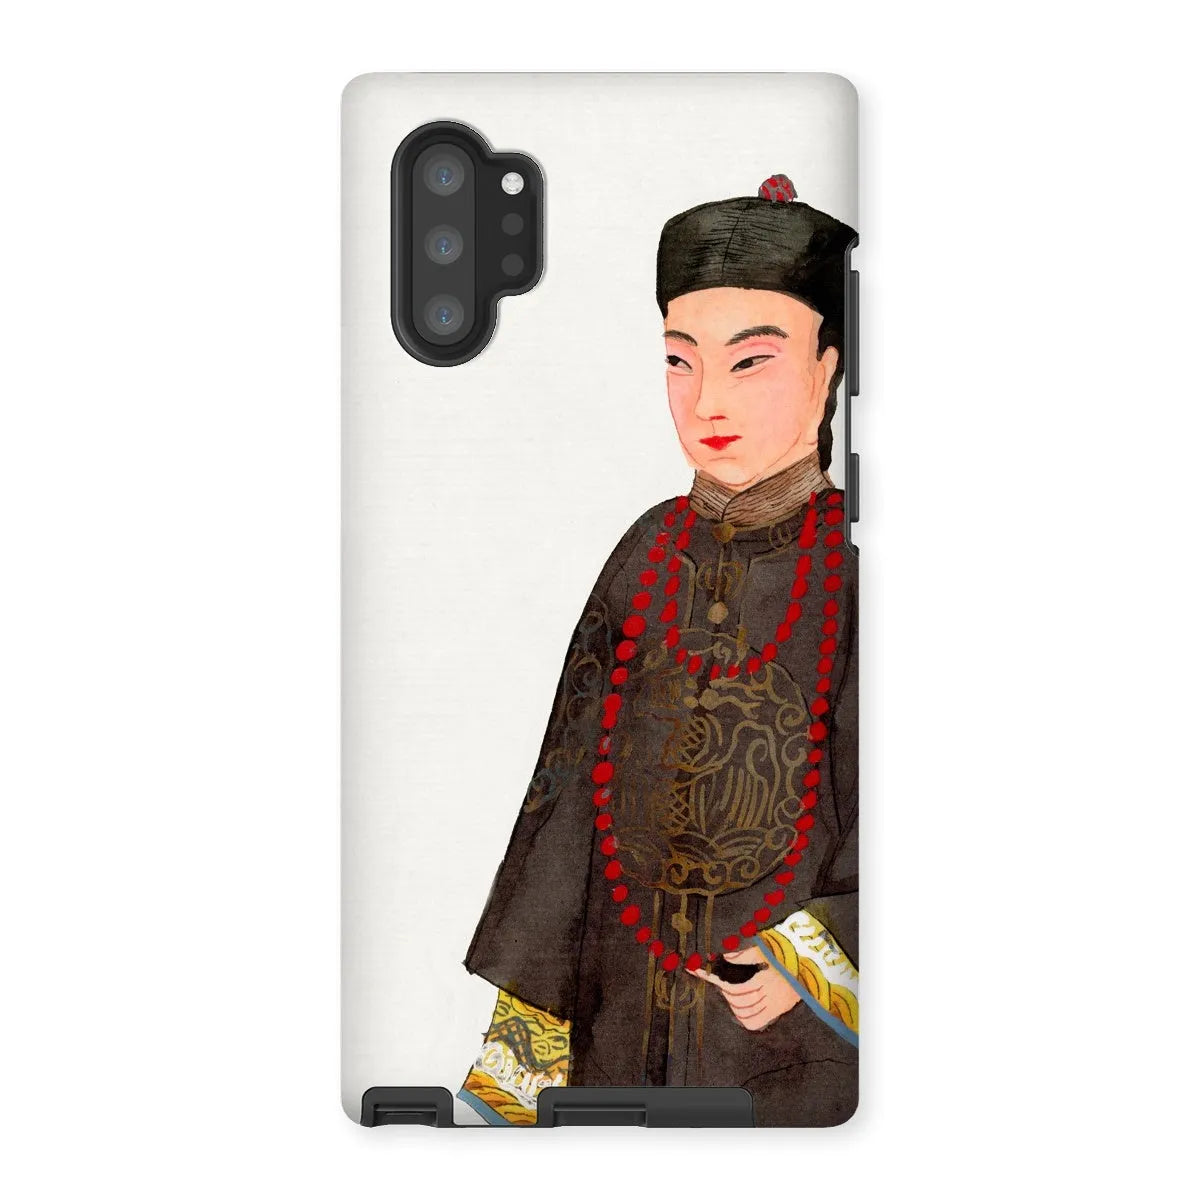 Emperor’s Courtier - Chinese Manchu Aesthetic Art Phone Case - Samsung Galaxy Note 10p / Matte - Mobile Phone Cases